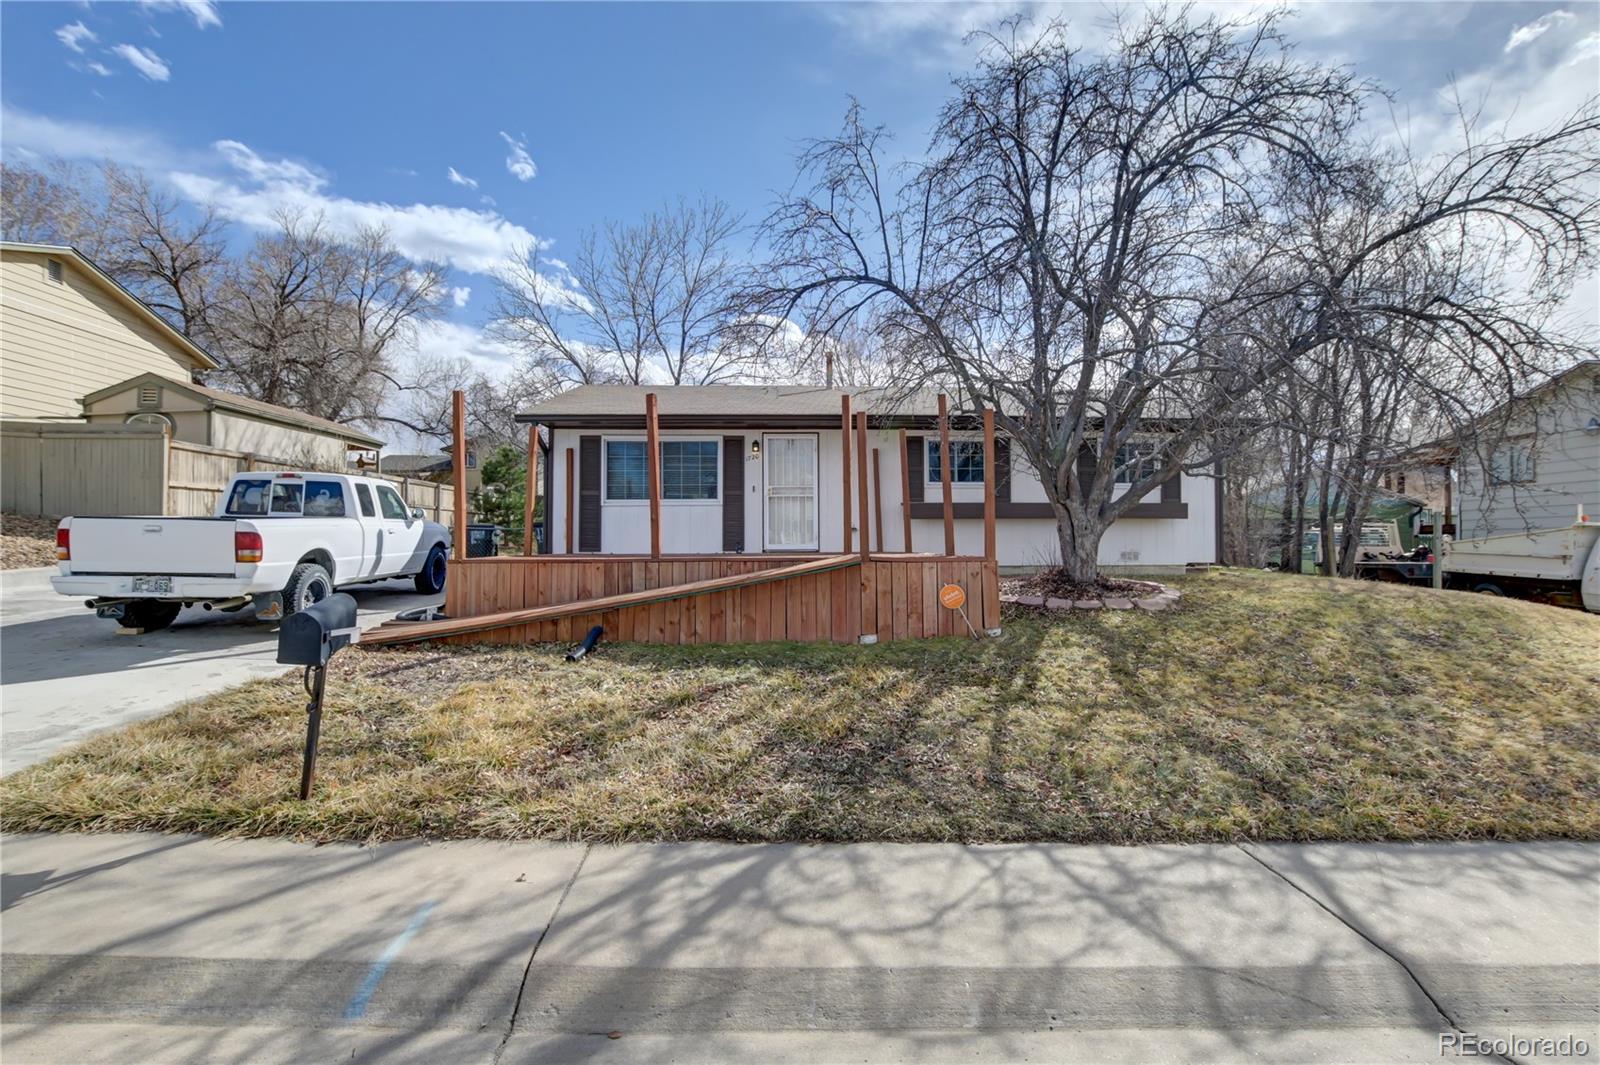 1720 e 83rd place, denver sold home. Closed on 2024-04-22 for $395,000.